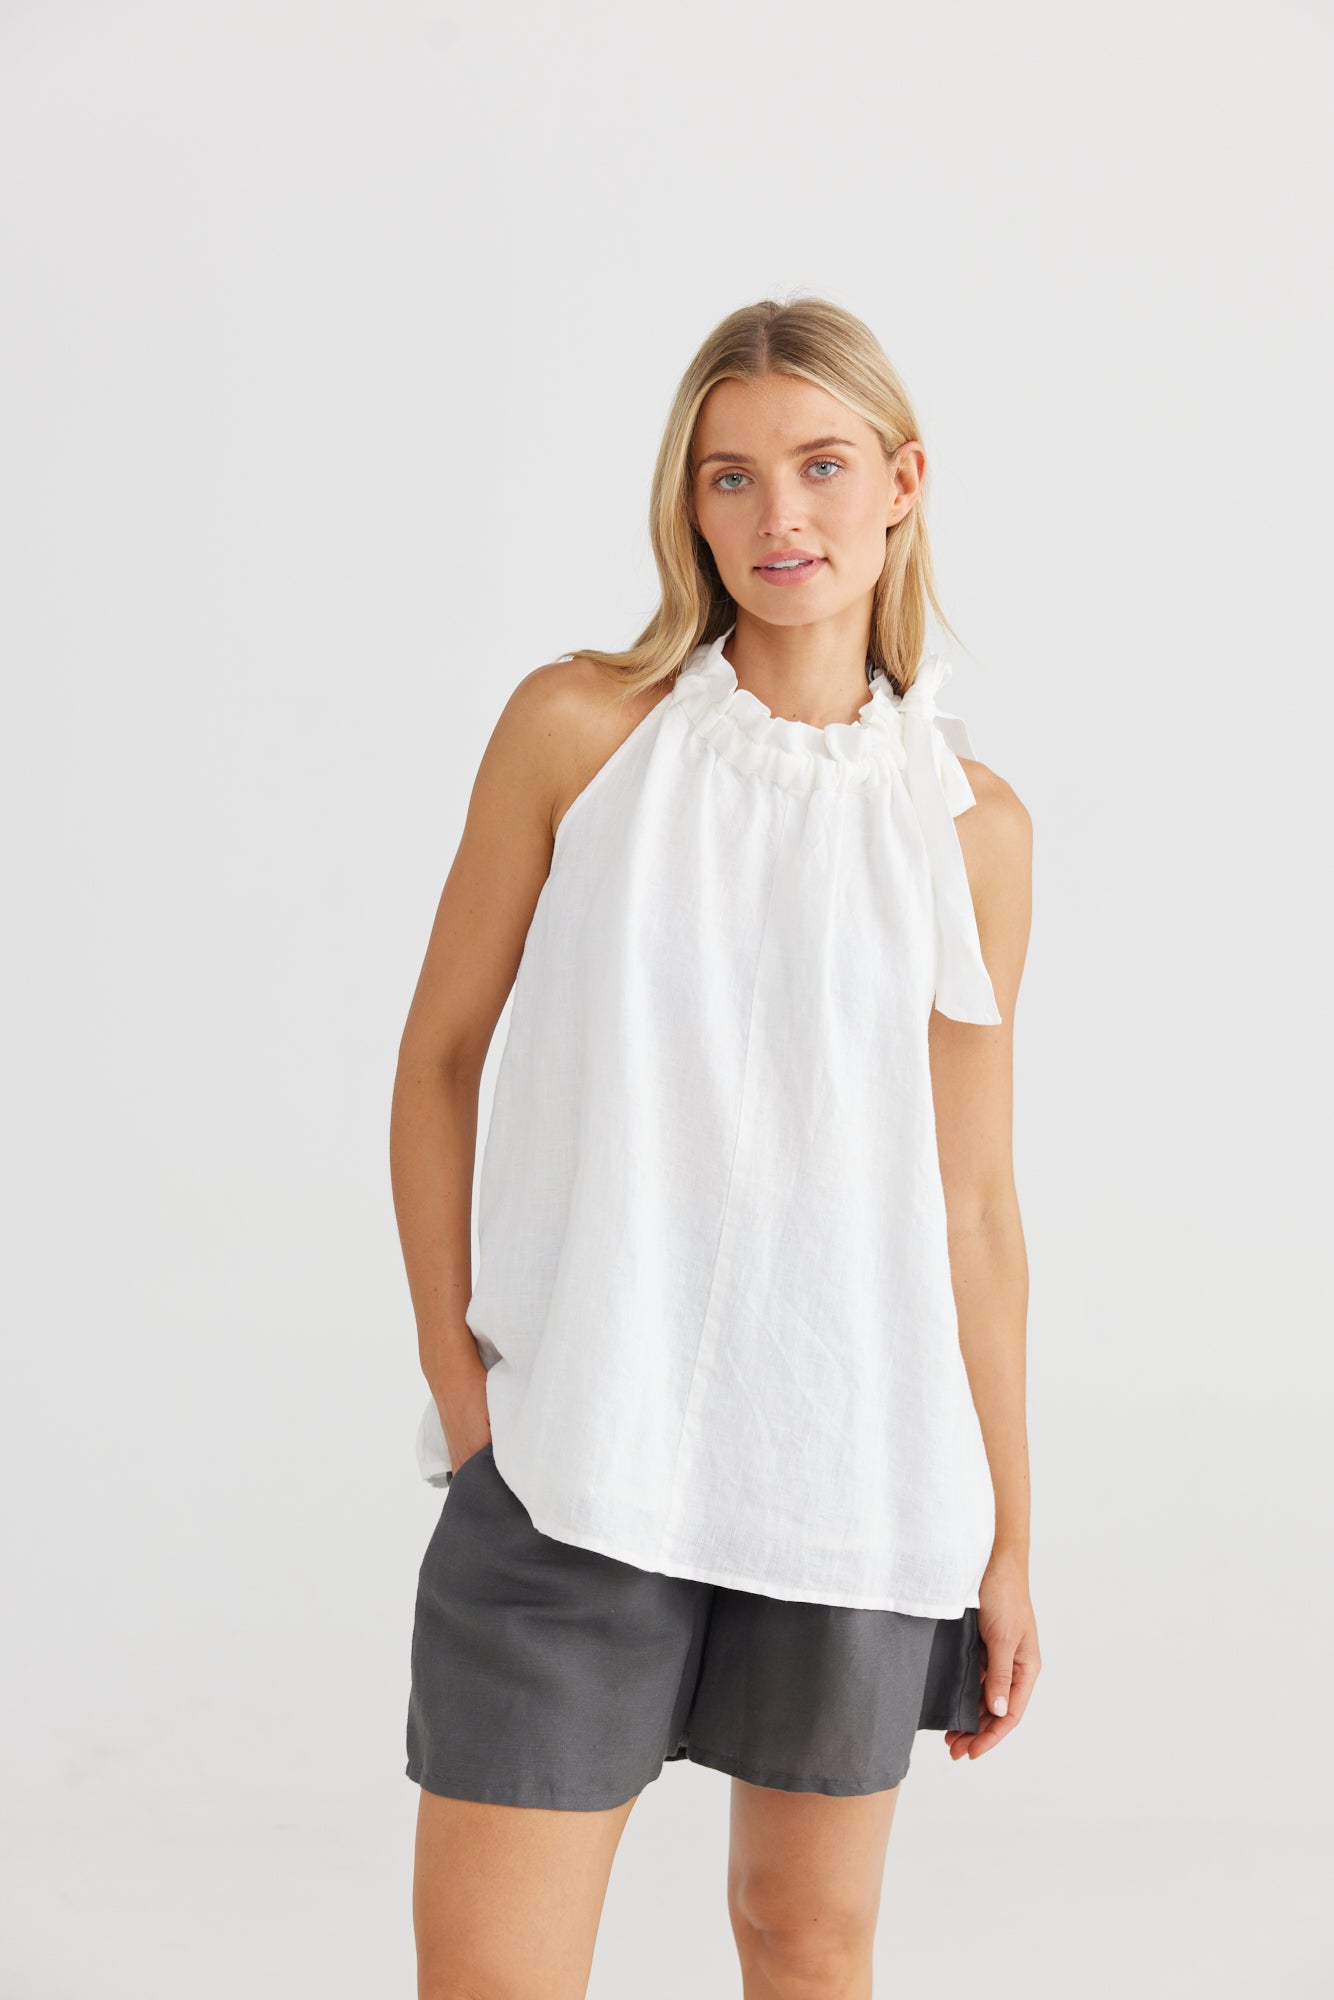 
                  
                    Lucia Top Floaty, relaxed fit Halter neck Paper bag drawstring neckline Charcoal - 55% Linen, 45% Viscose White - 100% Linen, lining 100% cotton
                  
                